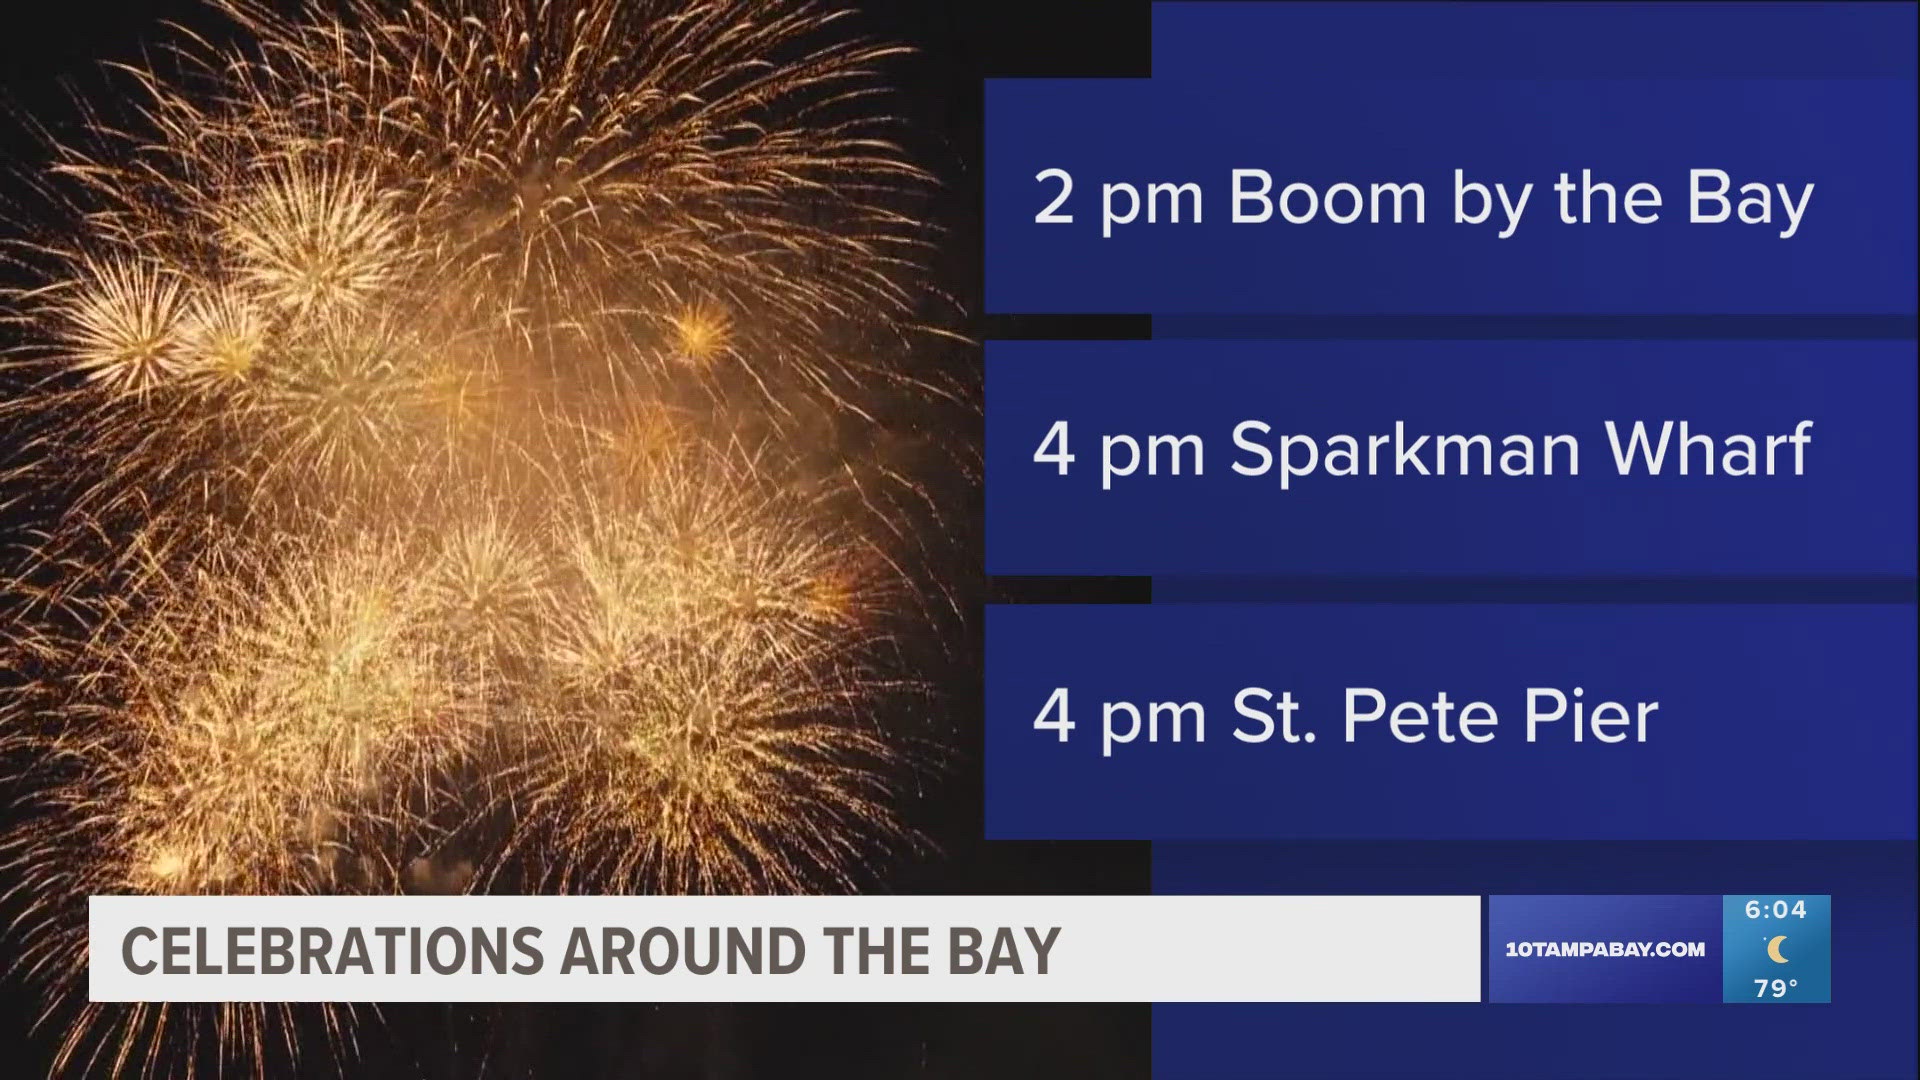 If you're setting off fireworks in your backyard, make sure you are staying safe.